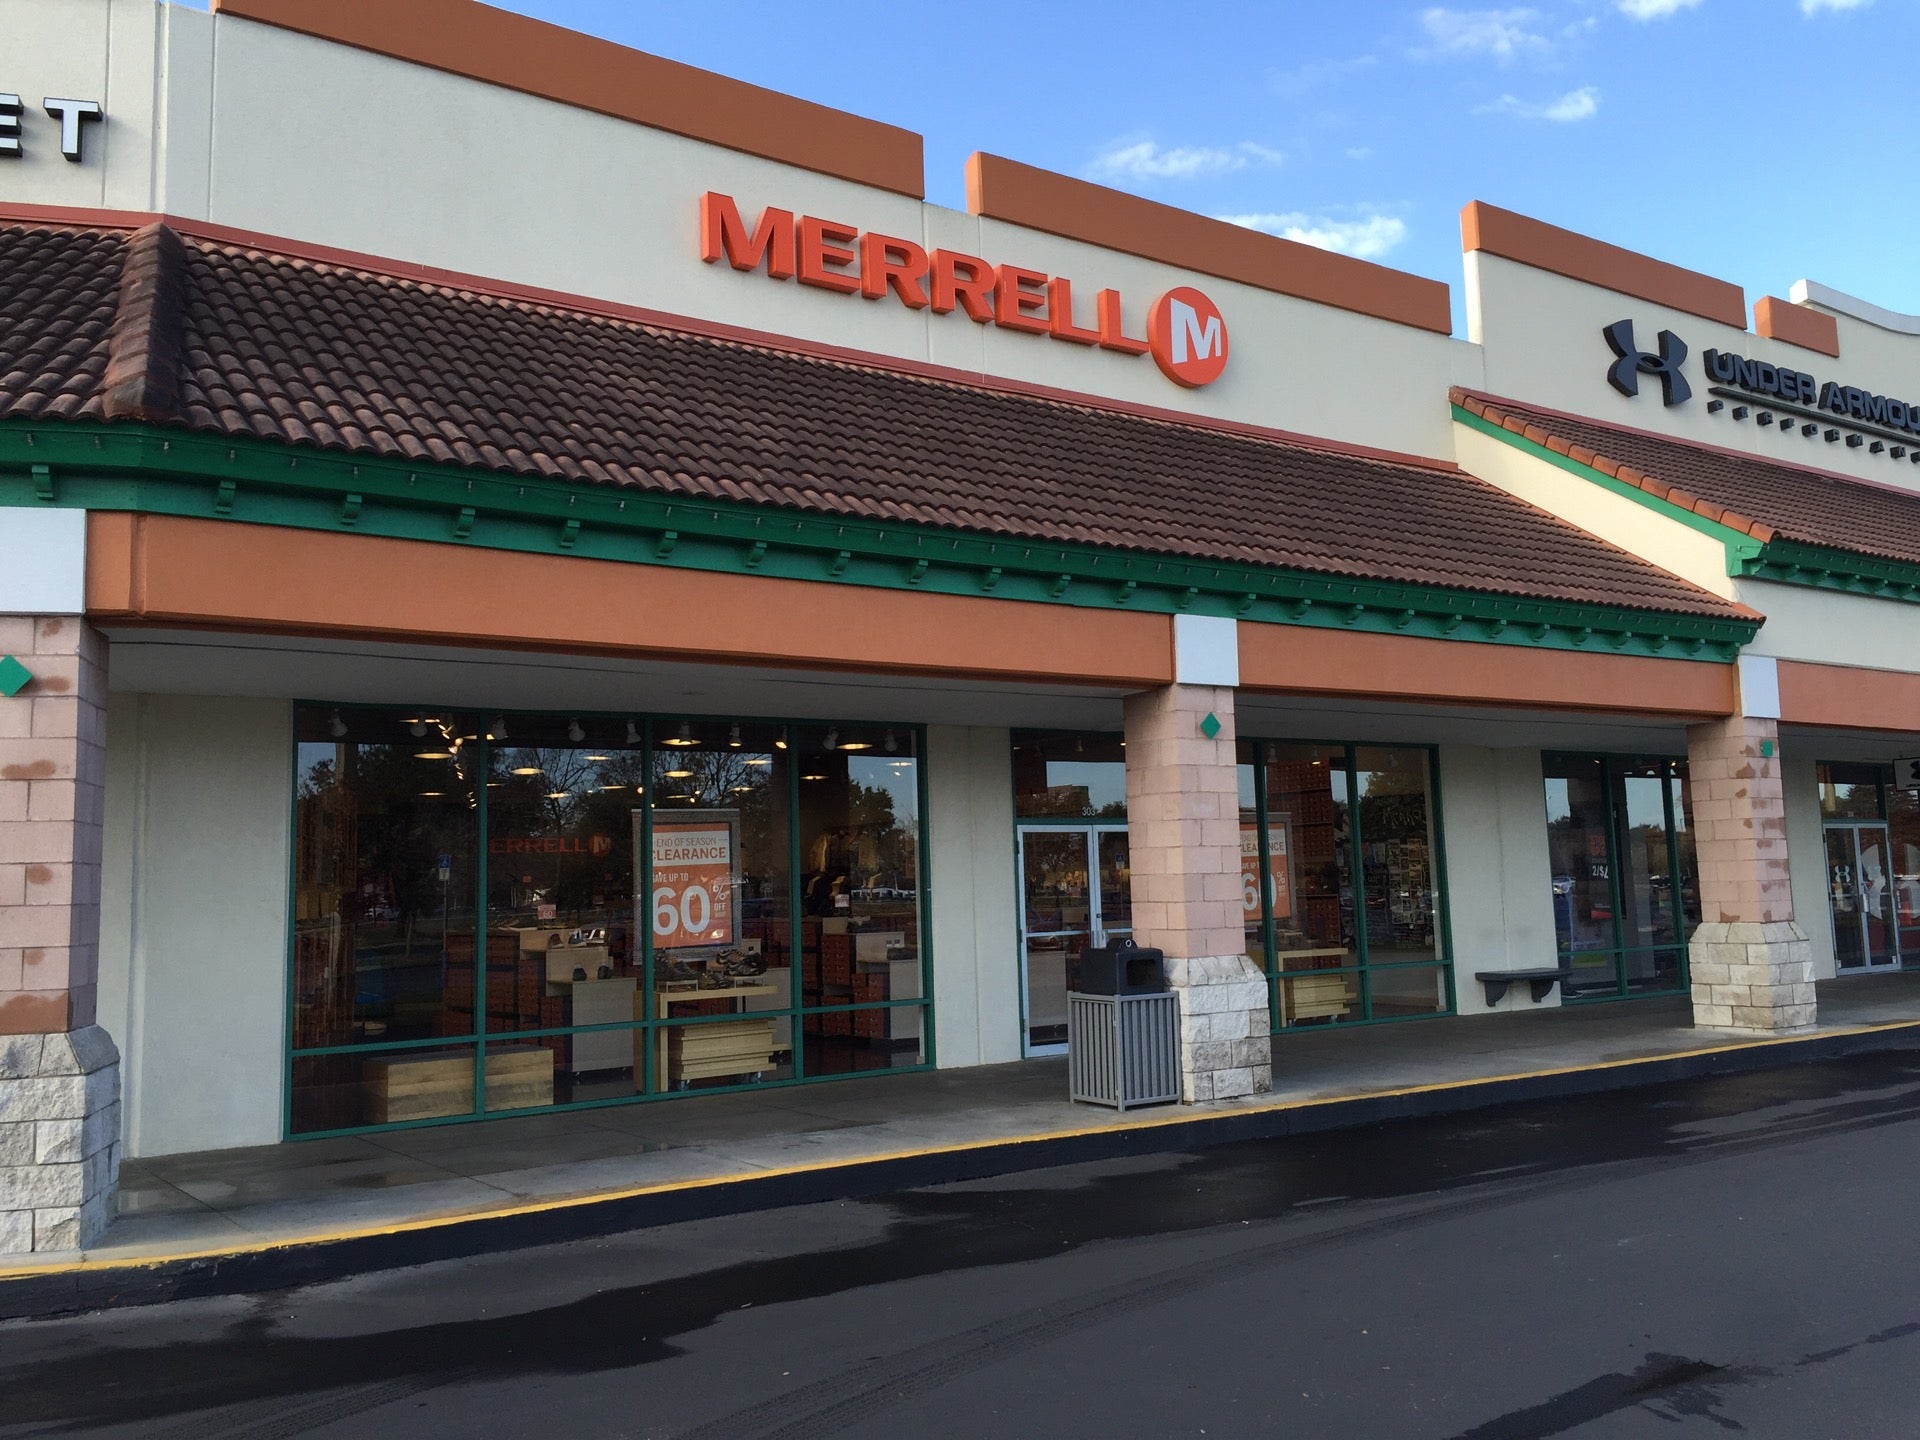 Merrell Outlet, 2700 State Road Augustine, FL, Children's Clothing MapQuest